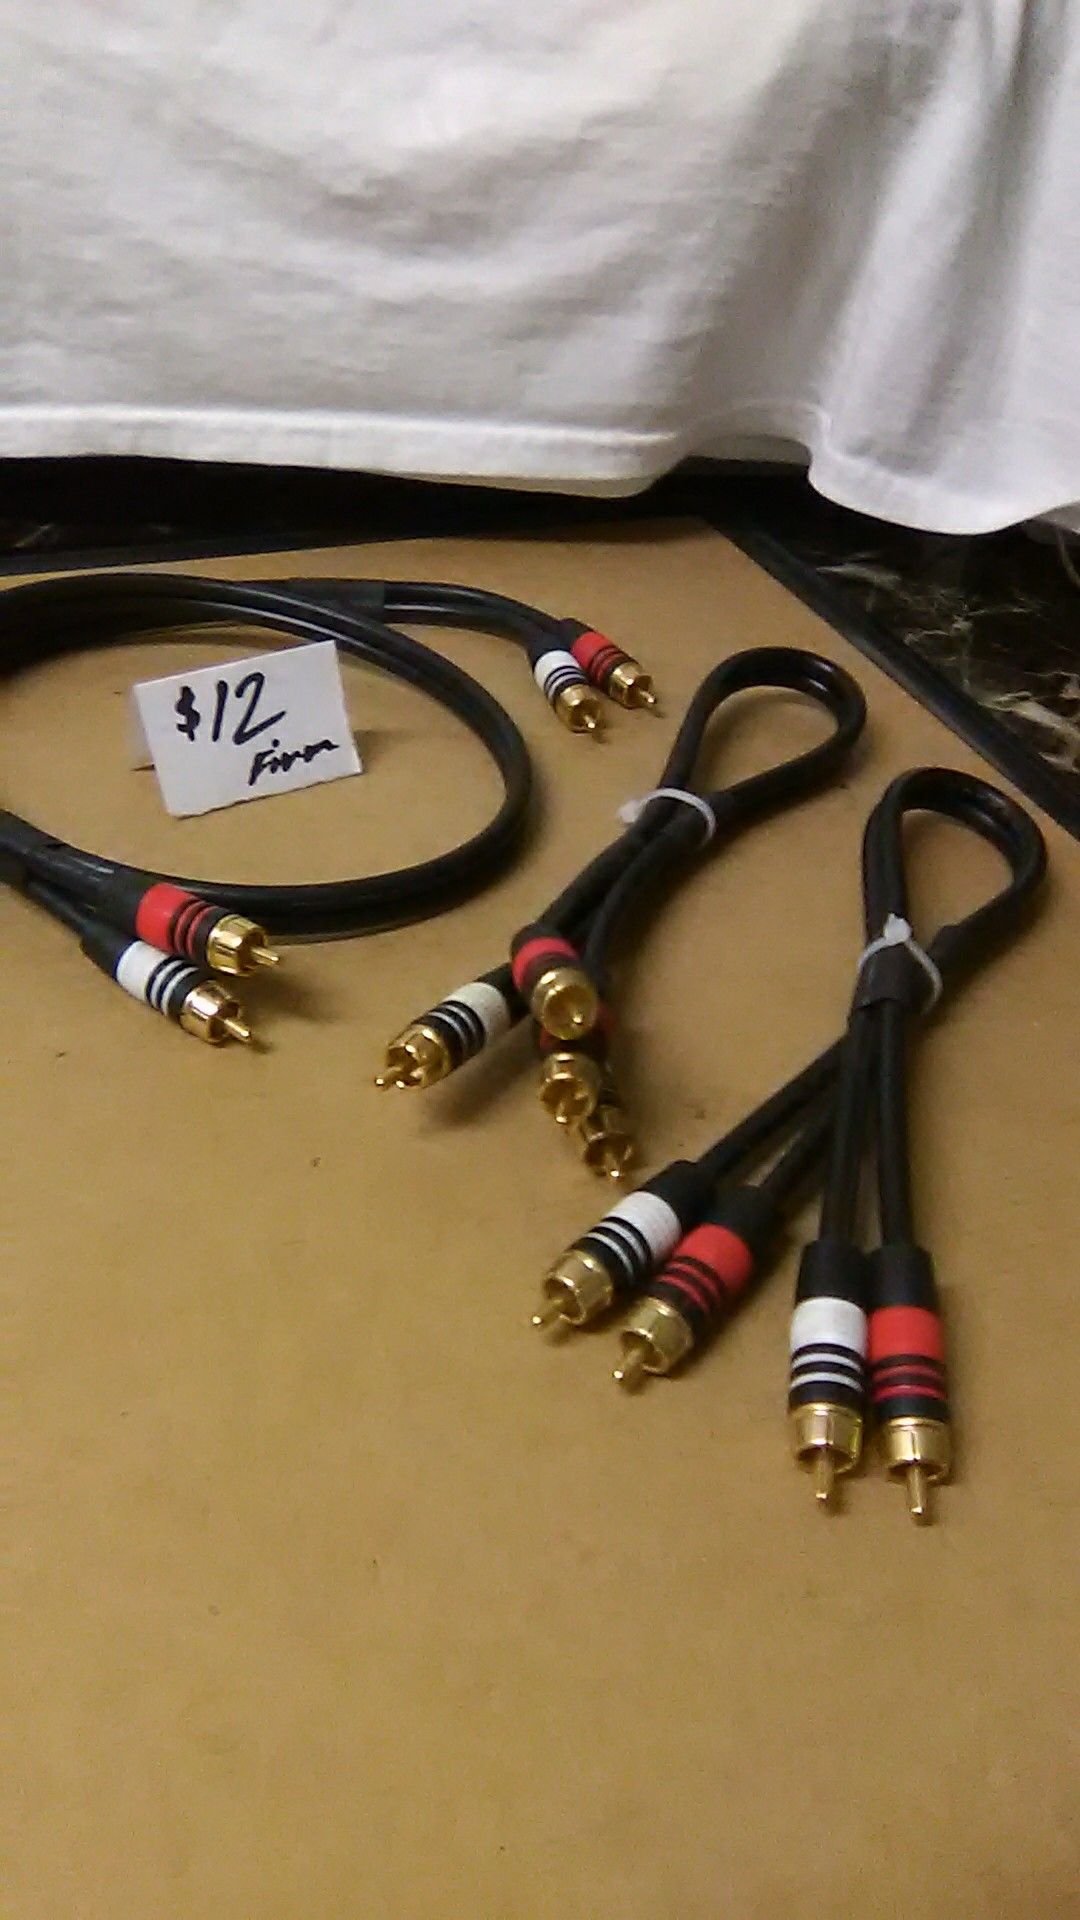 Rca audio cable all 3 for $12